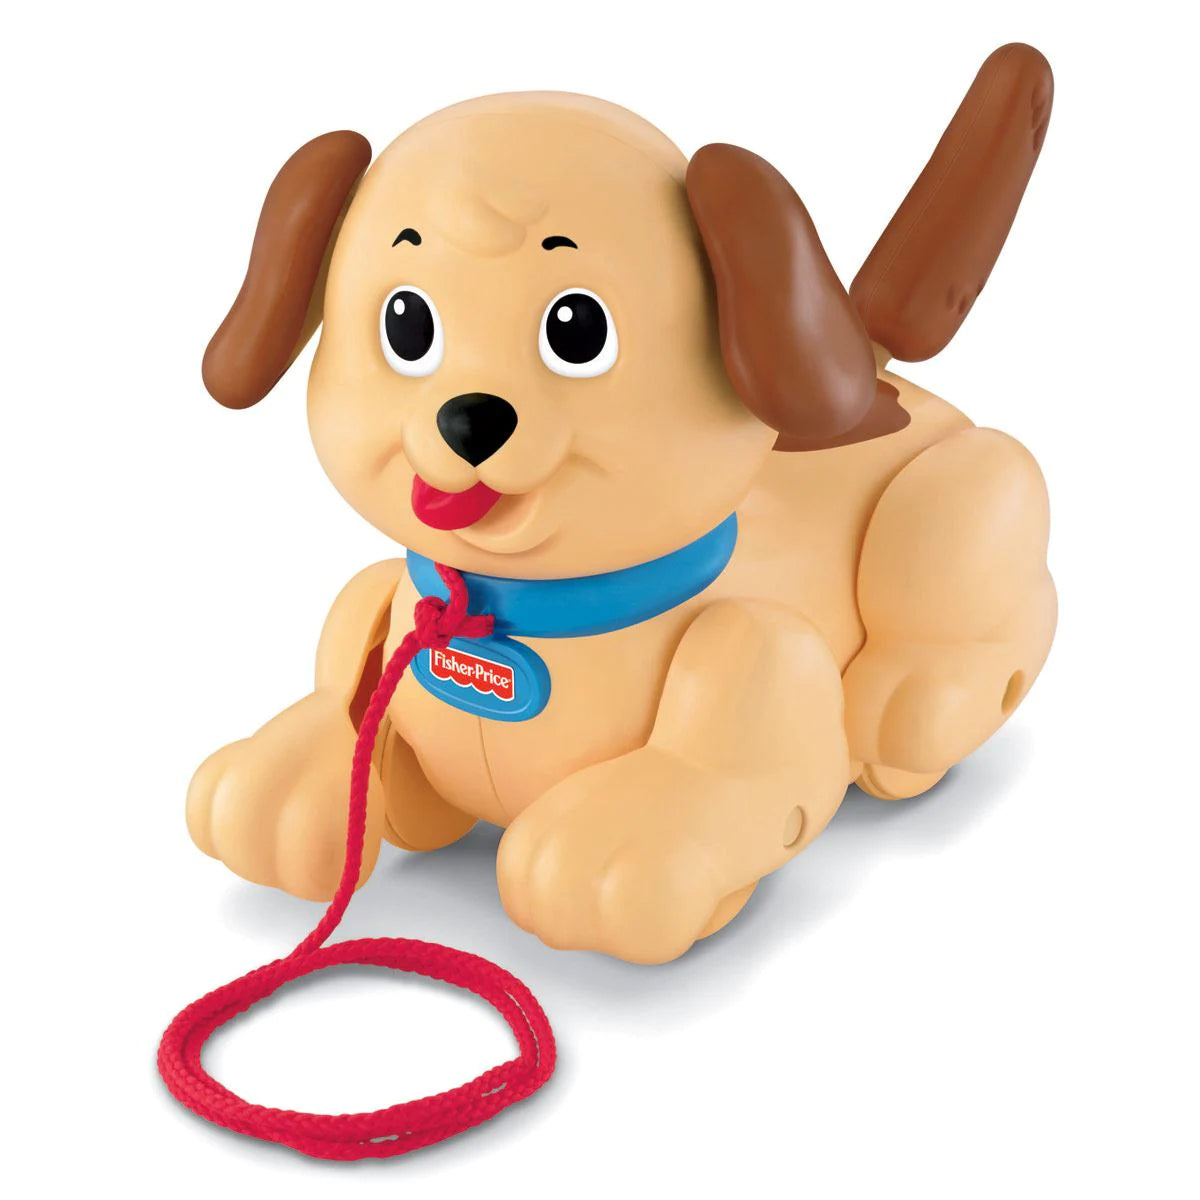 Fisher Price: Juguete Para Bebes - Peque√±o Snoopy